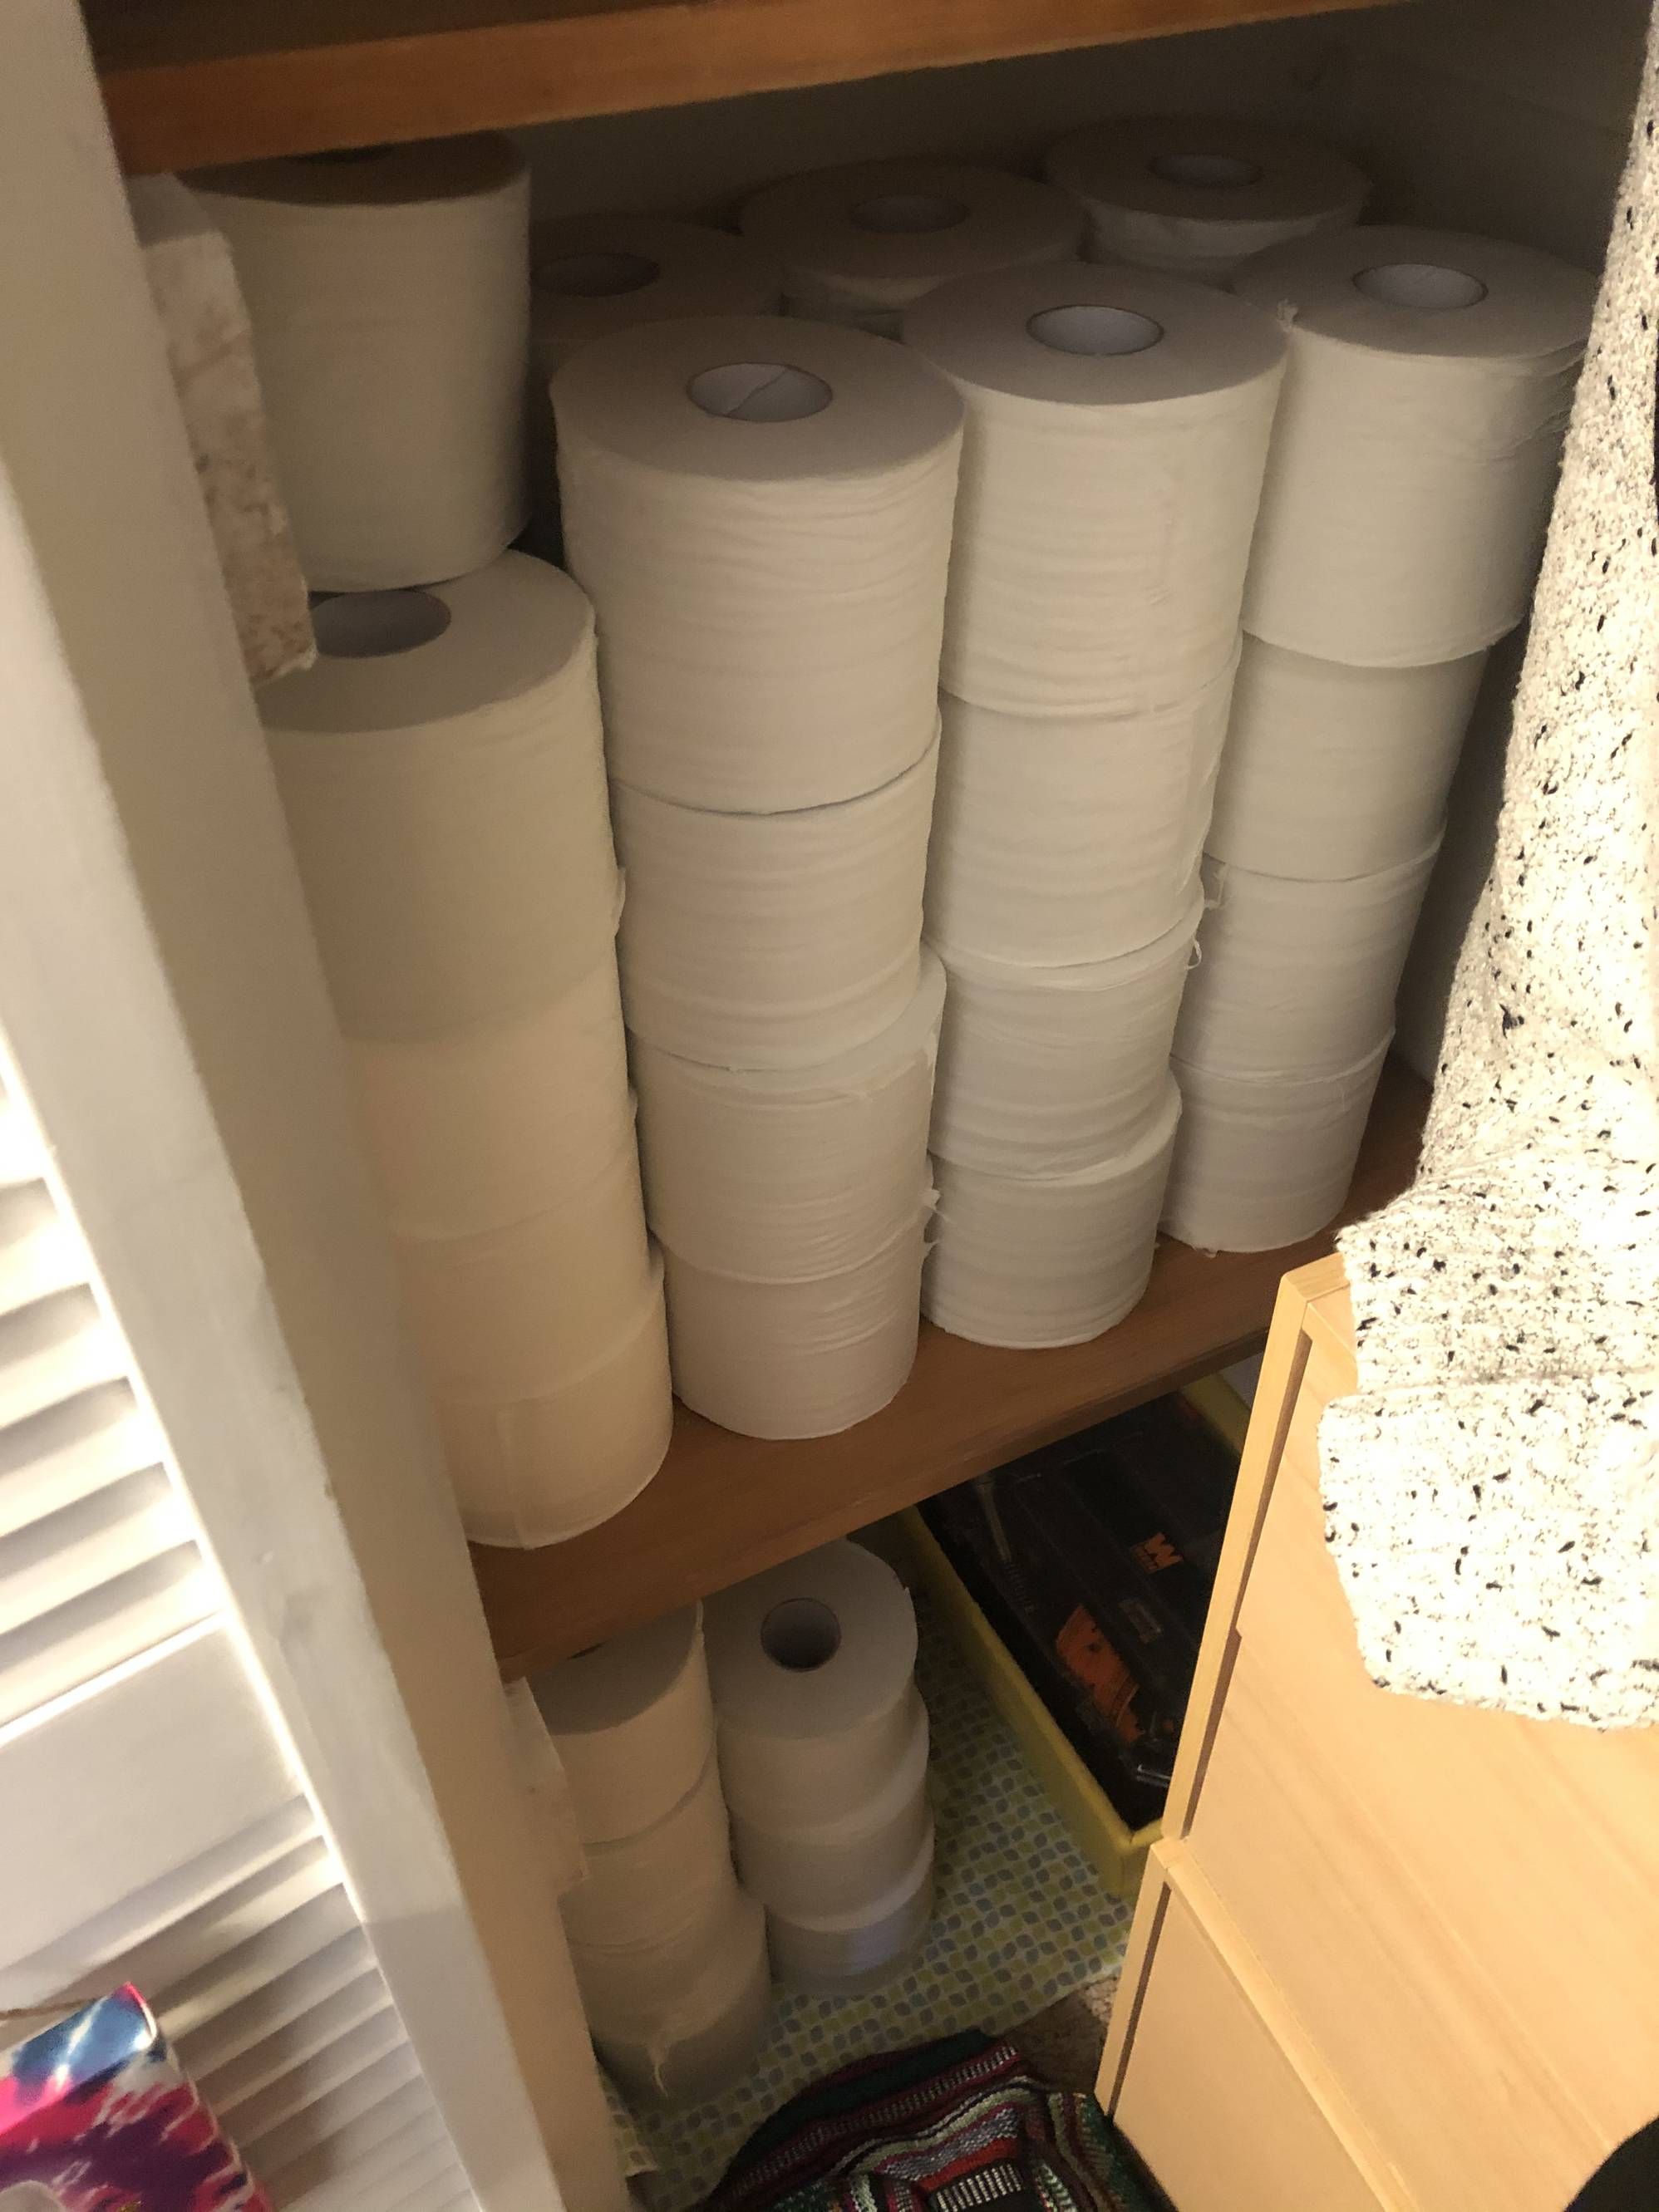 My company makes toilet paper, my coworkers laughed at me for taking home a damaged box of 96 rolls, whose laughing now!?